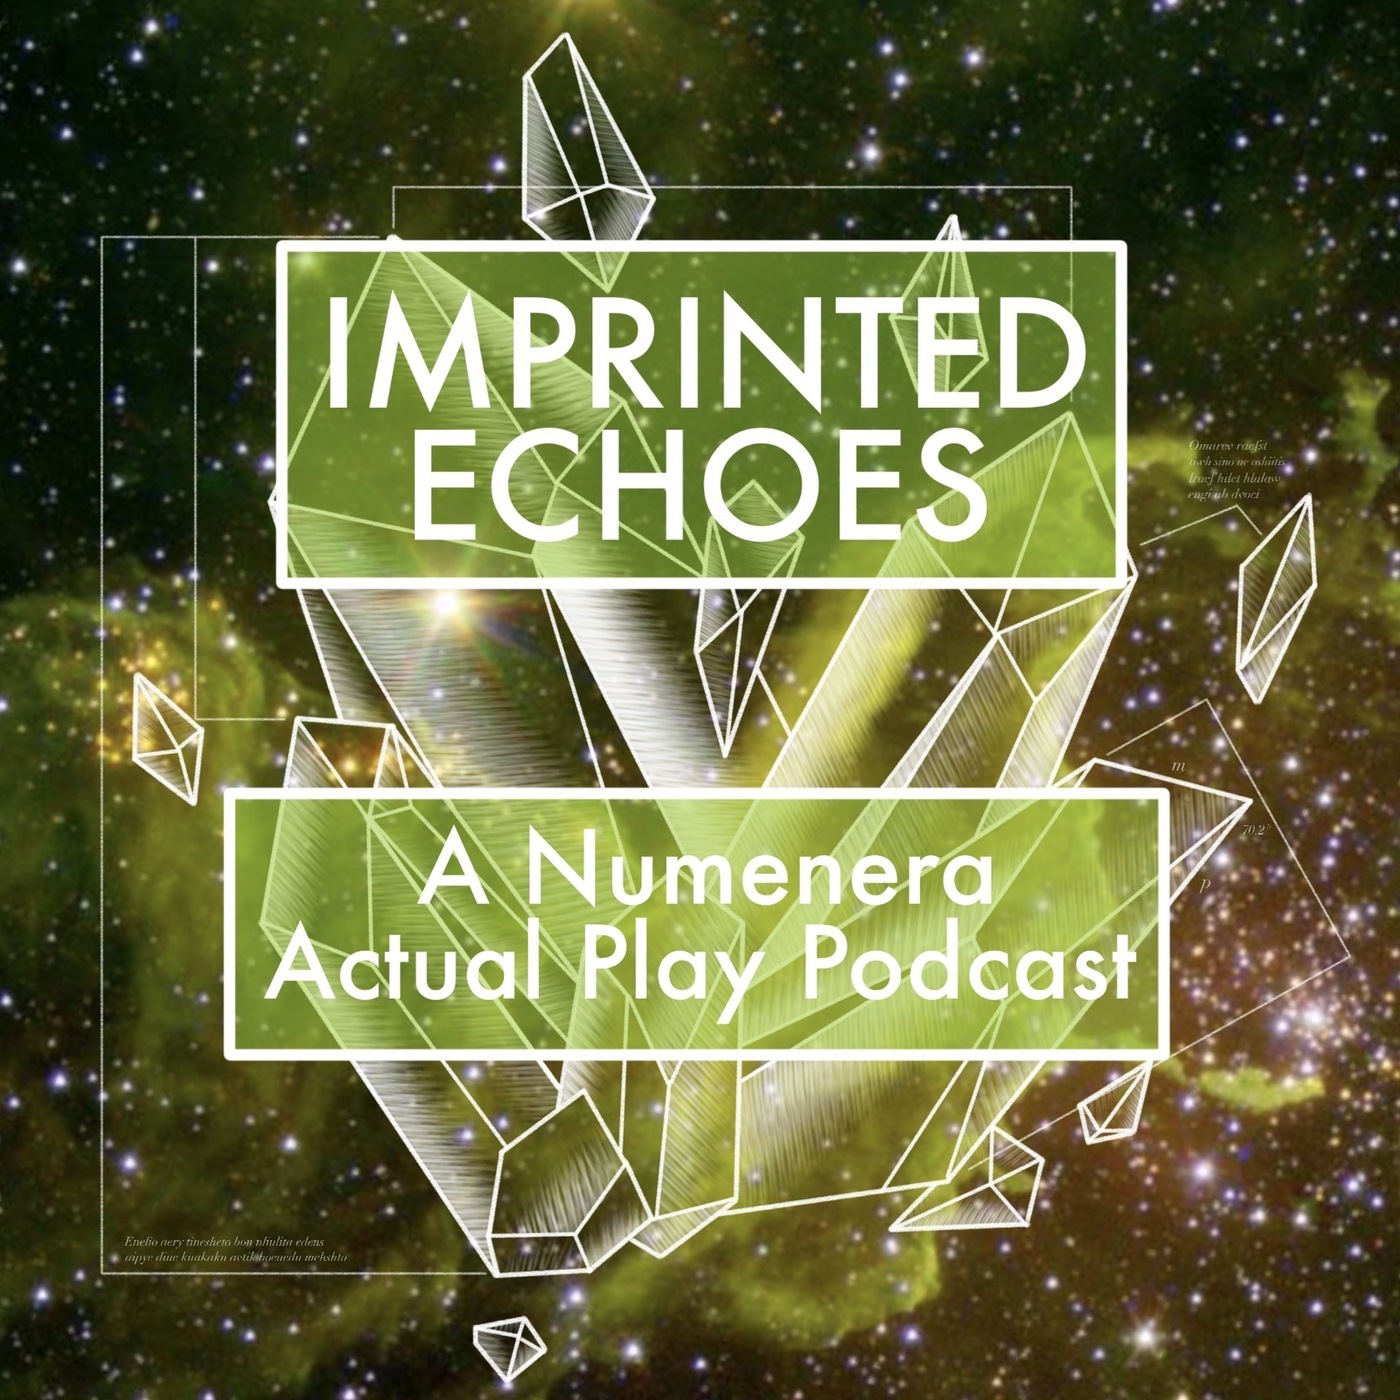 Imprinted Echoes 108: Anamnesis: Into the Woods